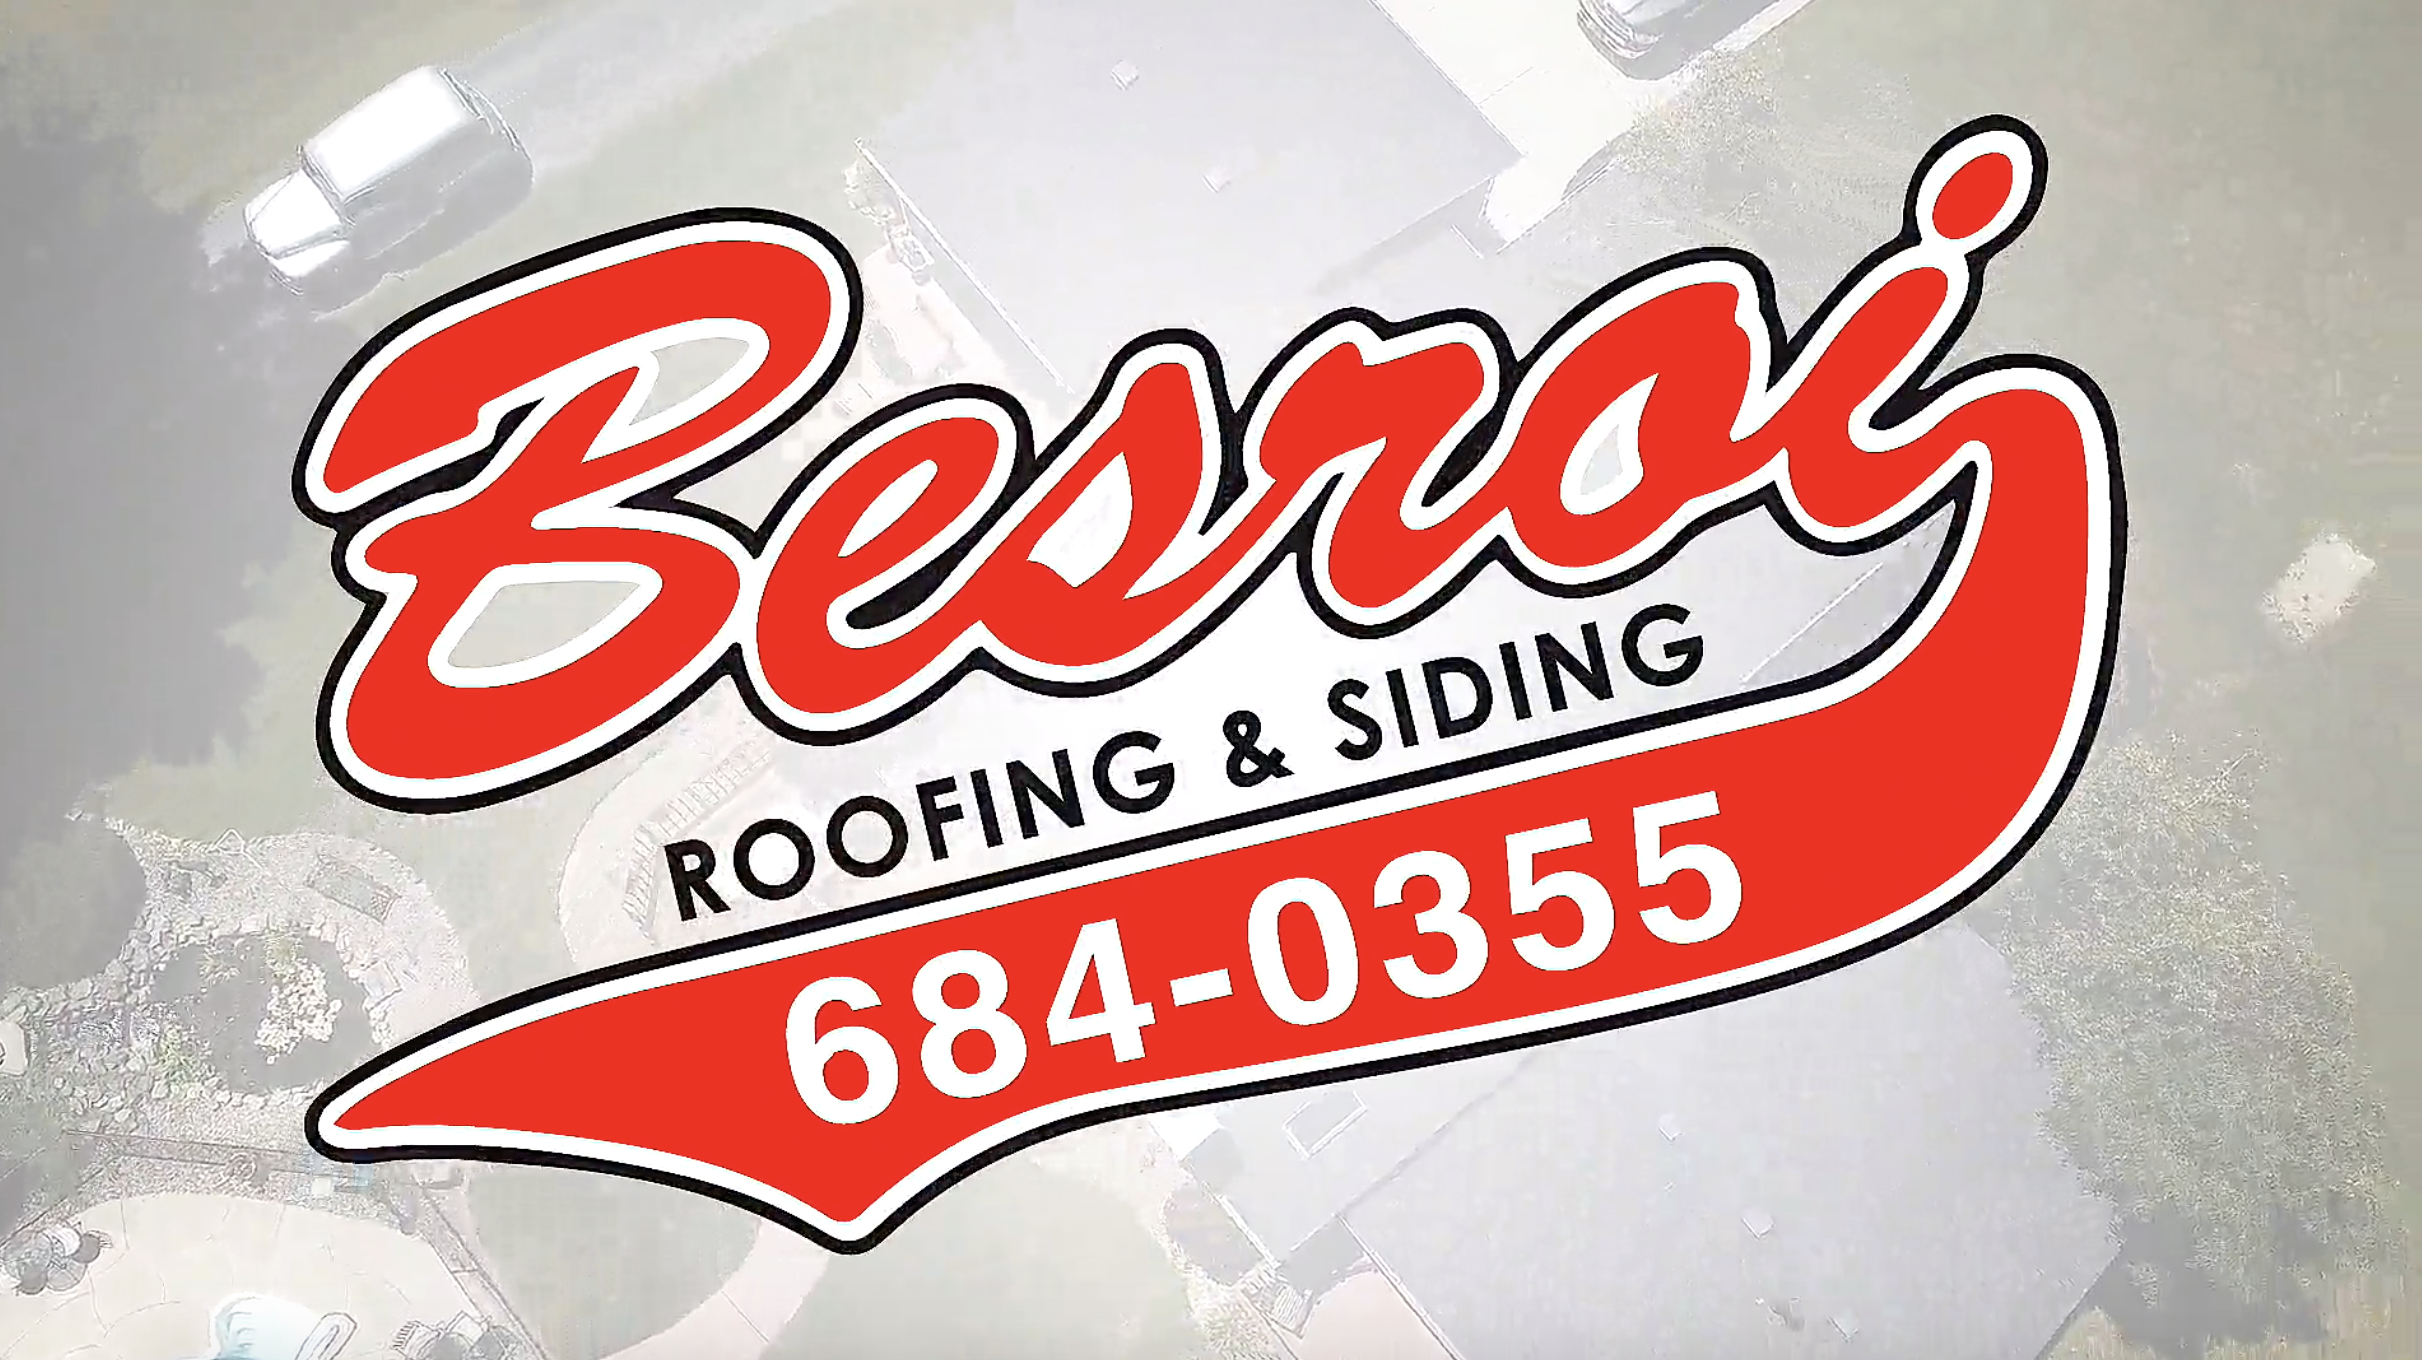 Besroi Roofing